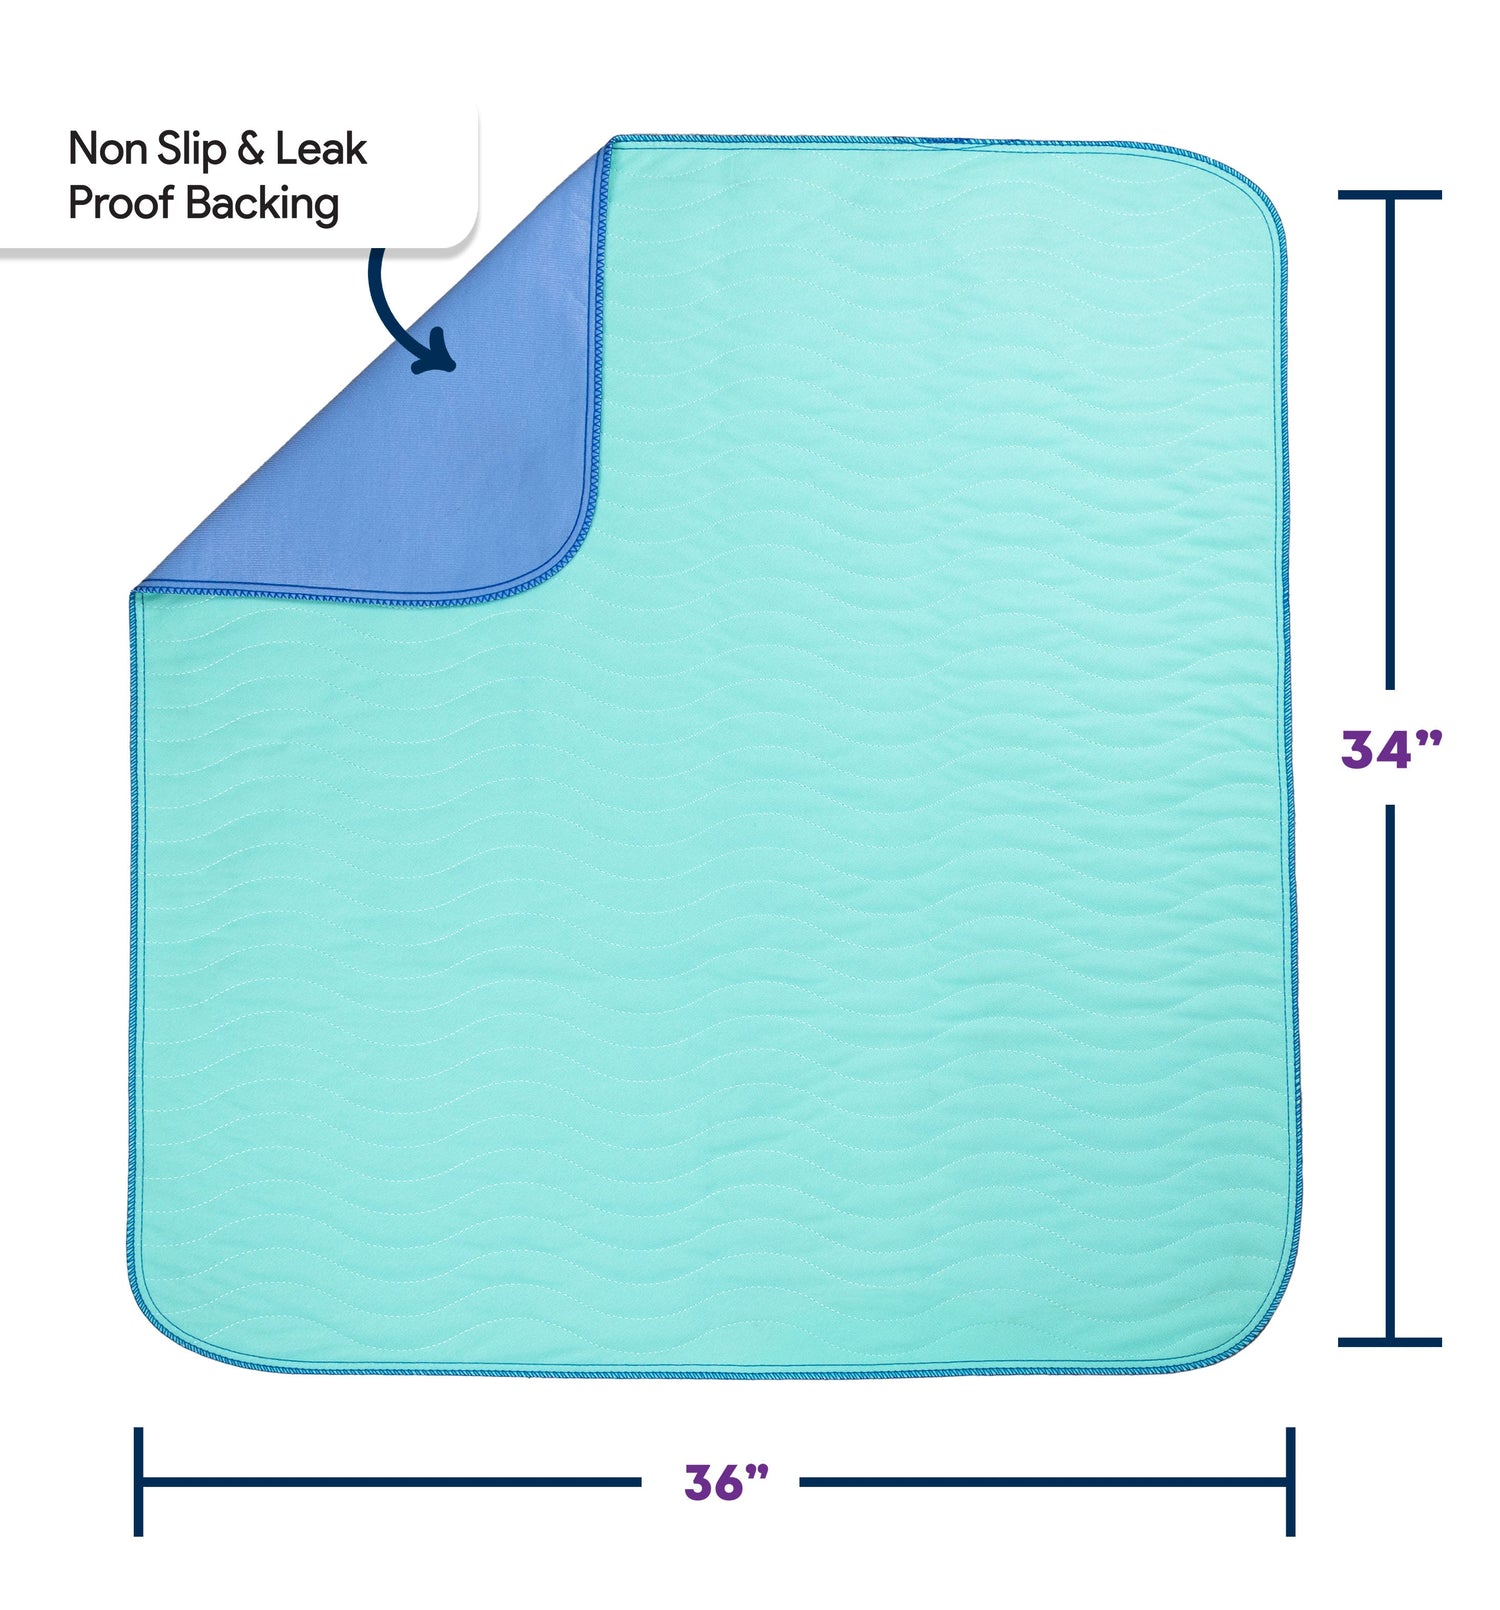 Non-Slip Bed Pads for Incontinence Washable (18 x 24|3 Pack),Waterproof  Bed Pads, Kids Washable Incontinence Bed Pads for Kids Adults,Dog,Kids